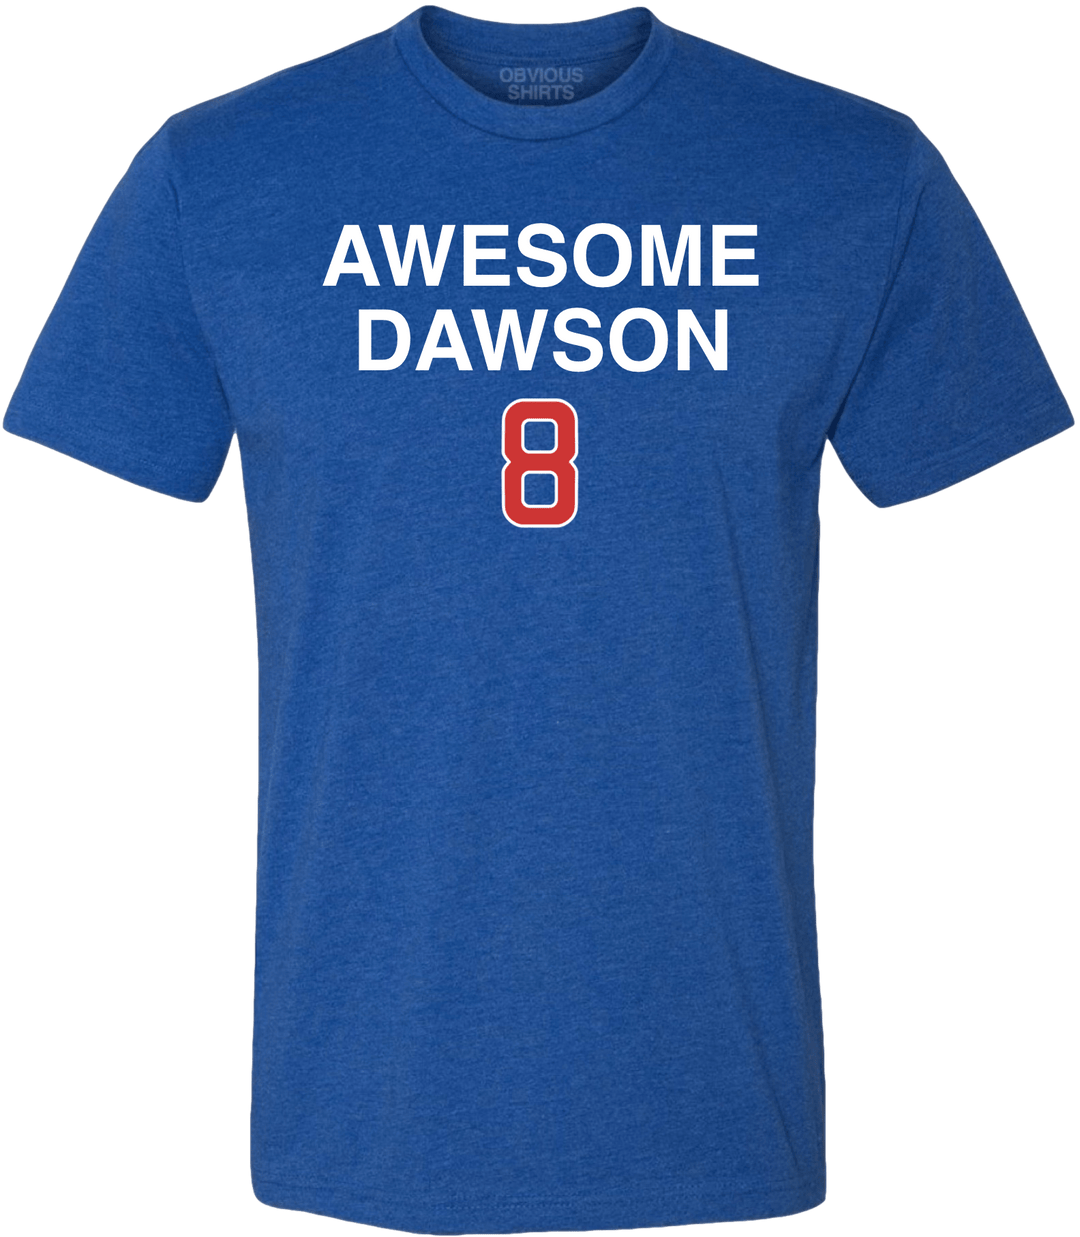 AWESOME DAWSON. - OBVIOUS SHIRTS